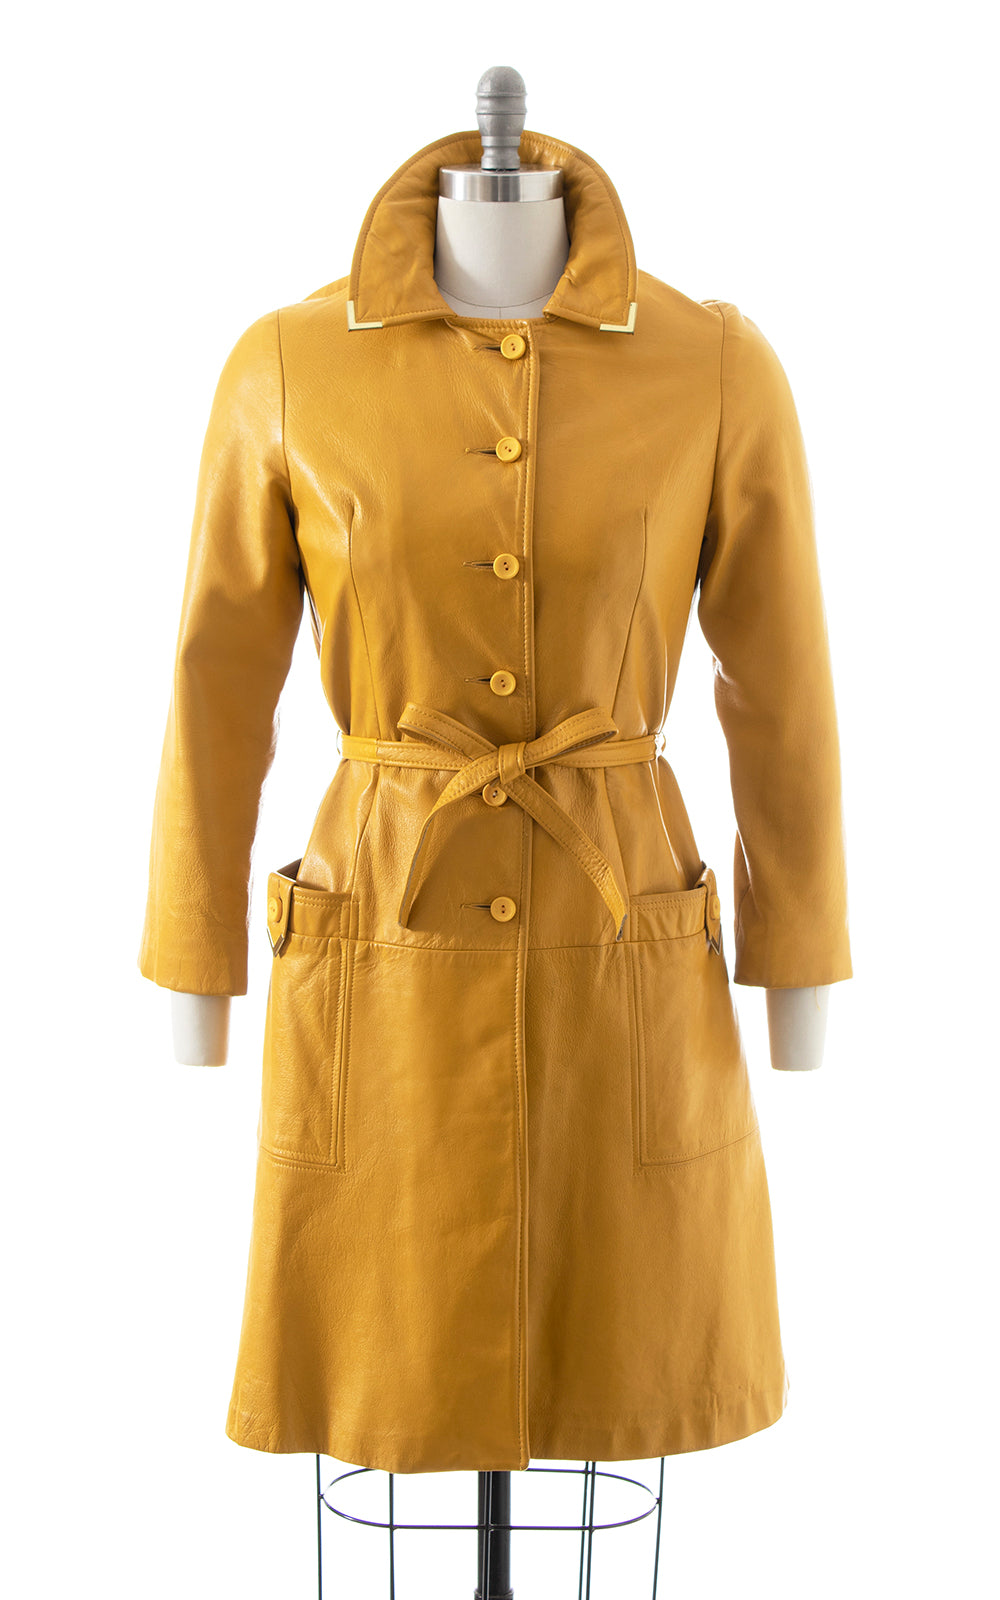 1960s 1970s Mustard Leather Coat with Brass Tips | x-small/small